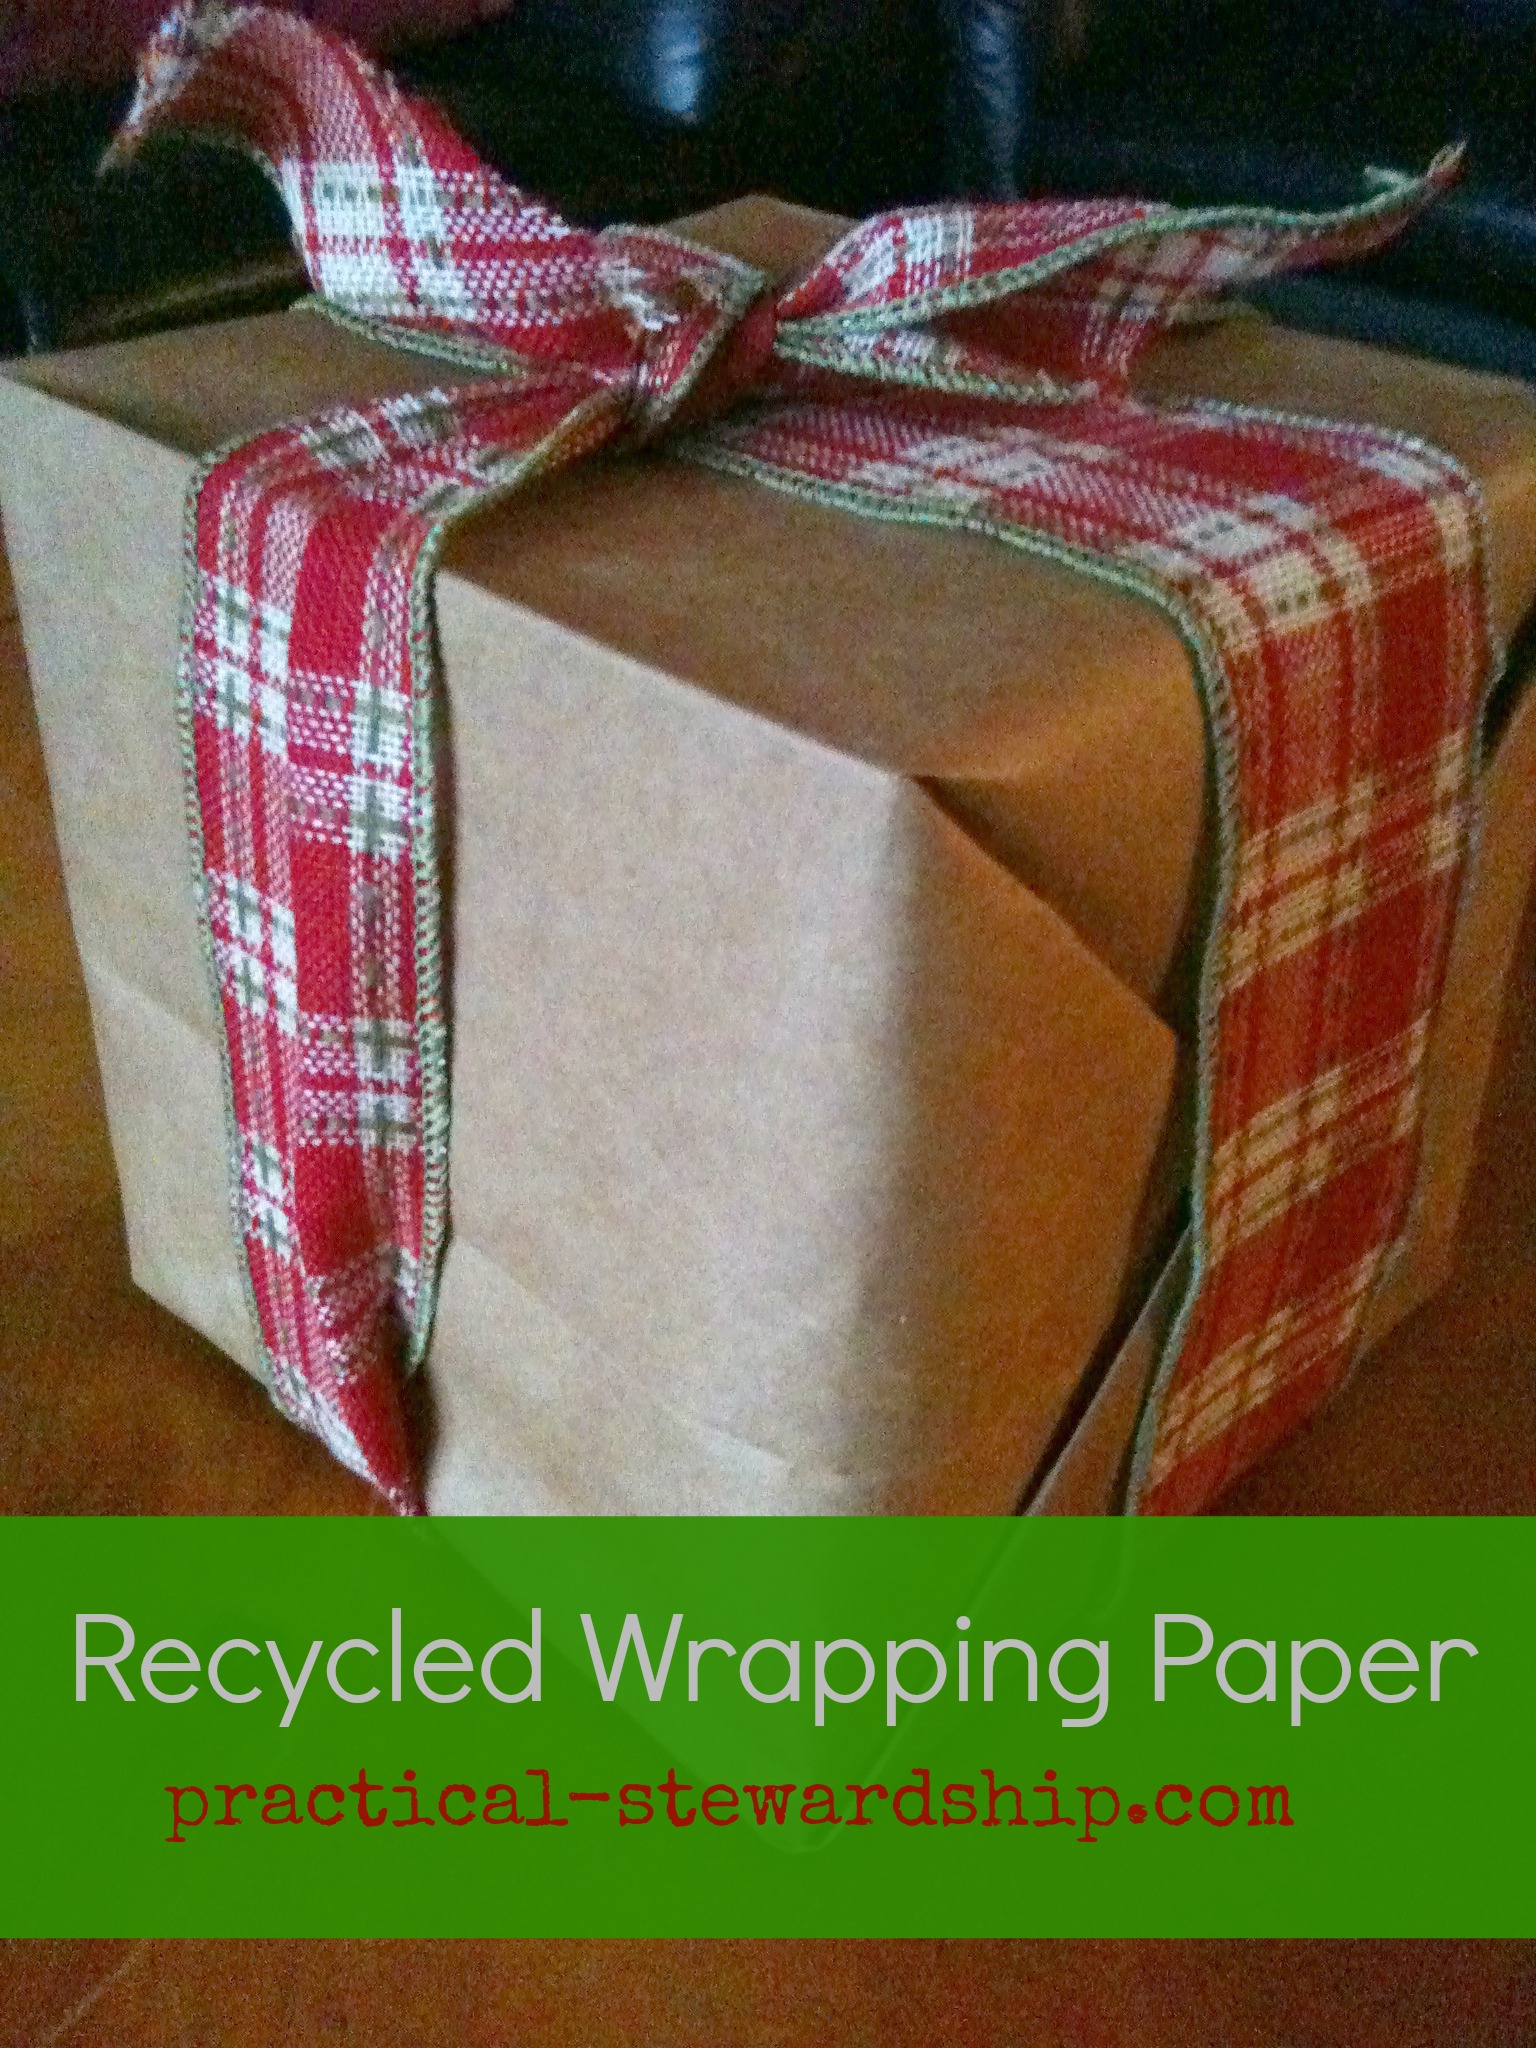 Recycling & Repurposing Part 2: Wrapping Paper - Practical Stewardship